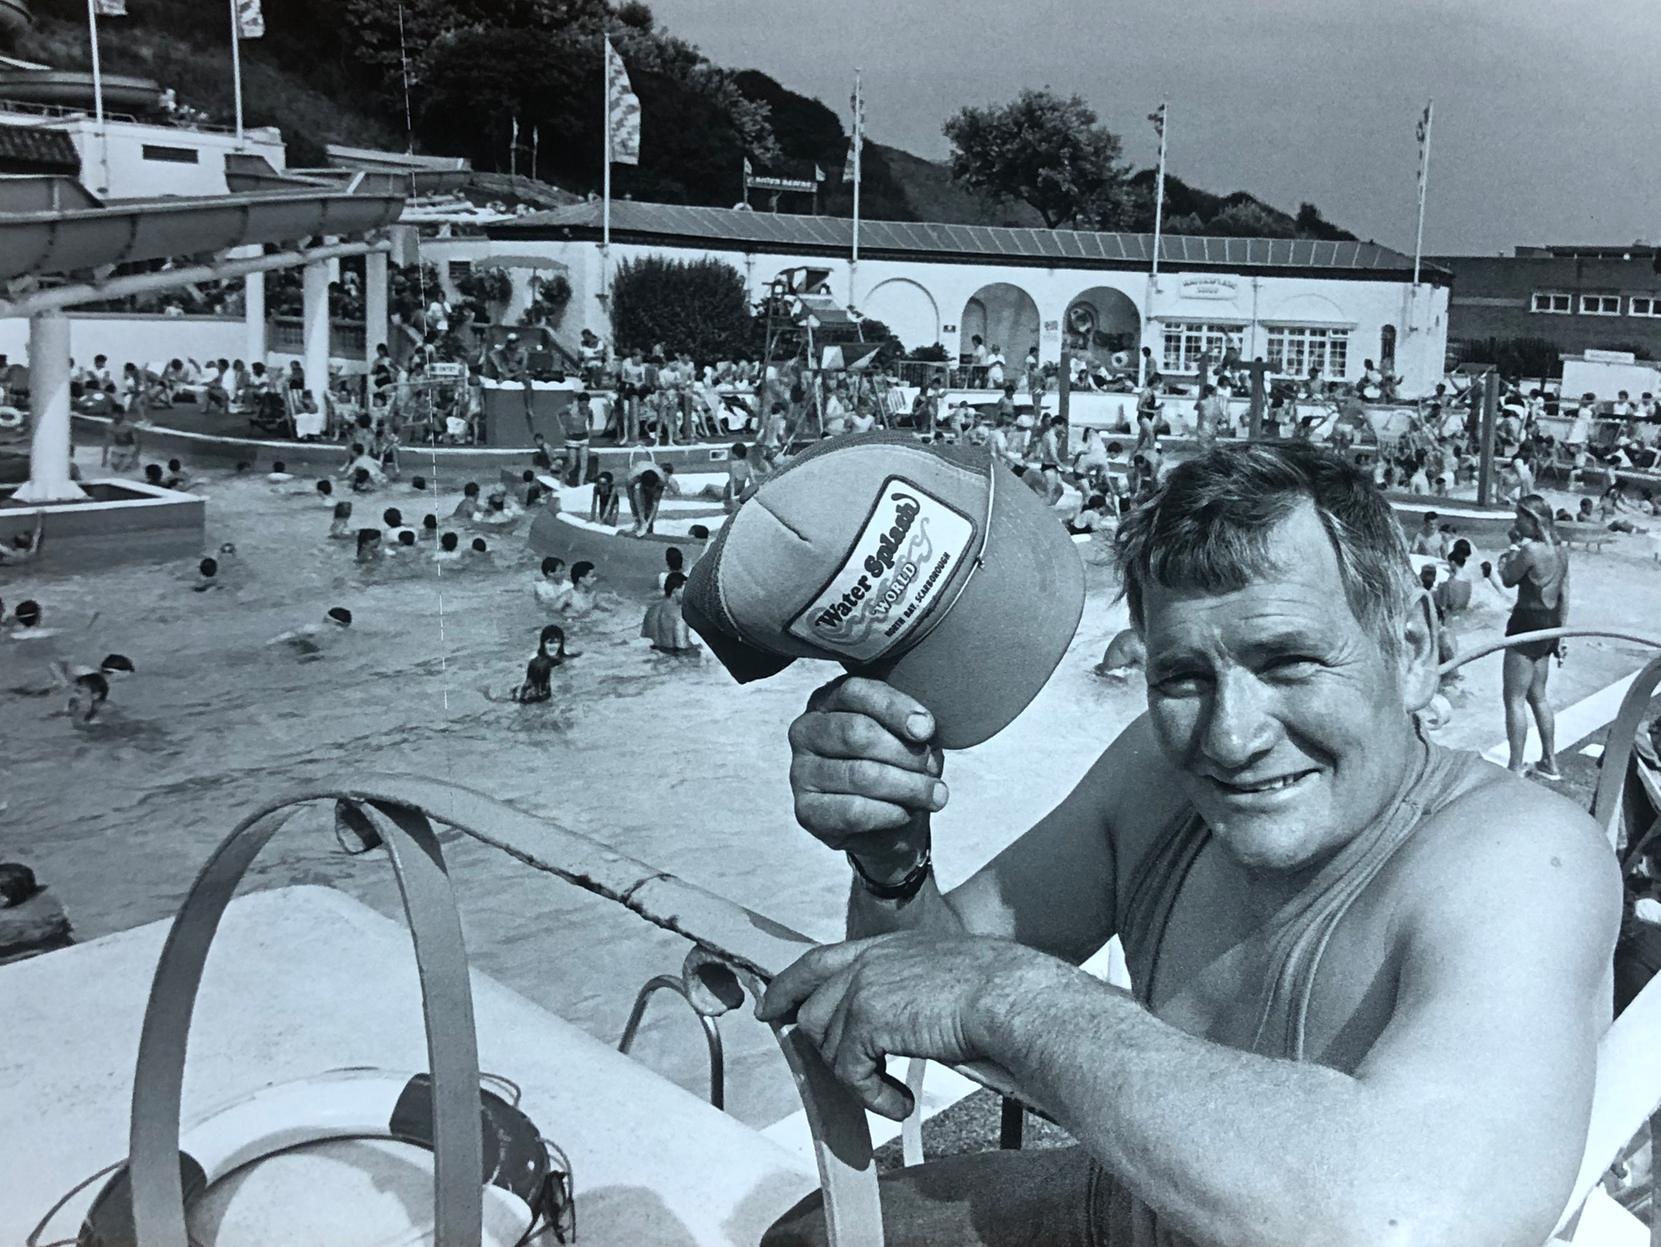 The North Bay Bathing Pool was transformed into Waterscene in 1984 and you were there to take a trip down, at the time, the longest water slide in the WORLD. In 1987 the name changed to Watersplash but the fun remained.